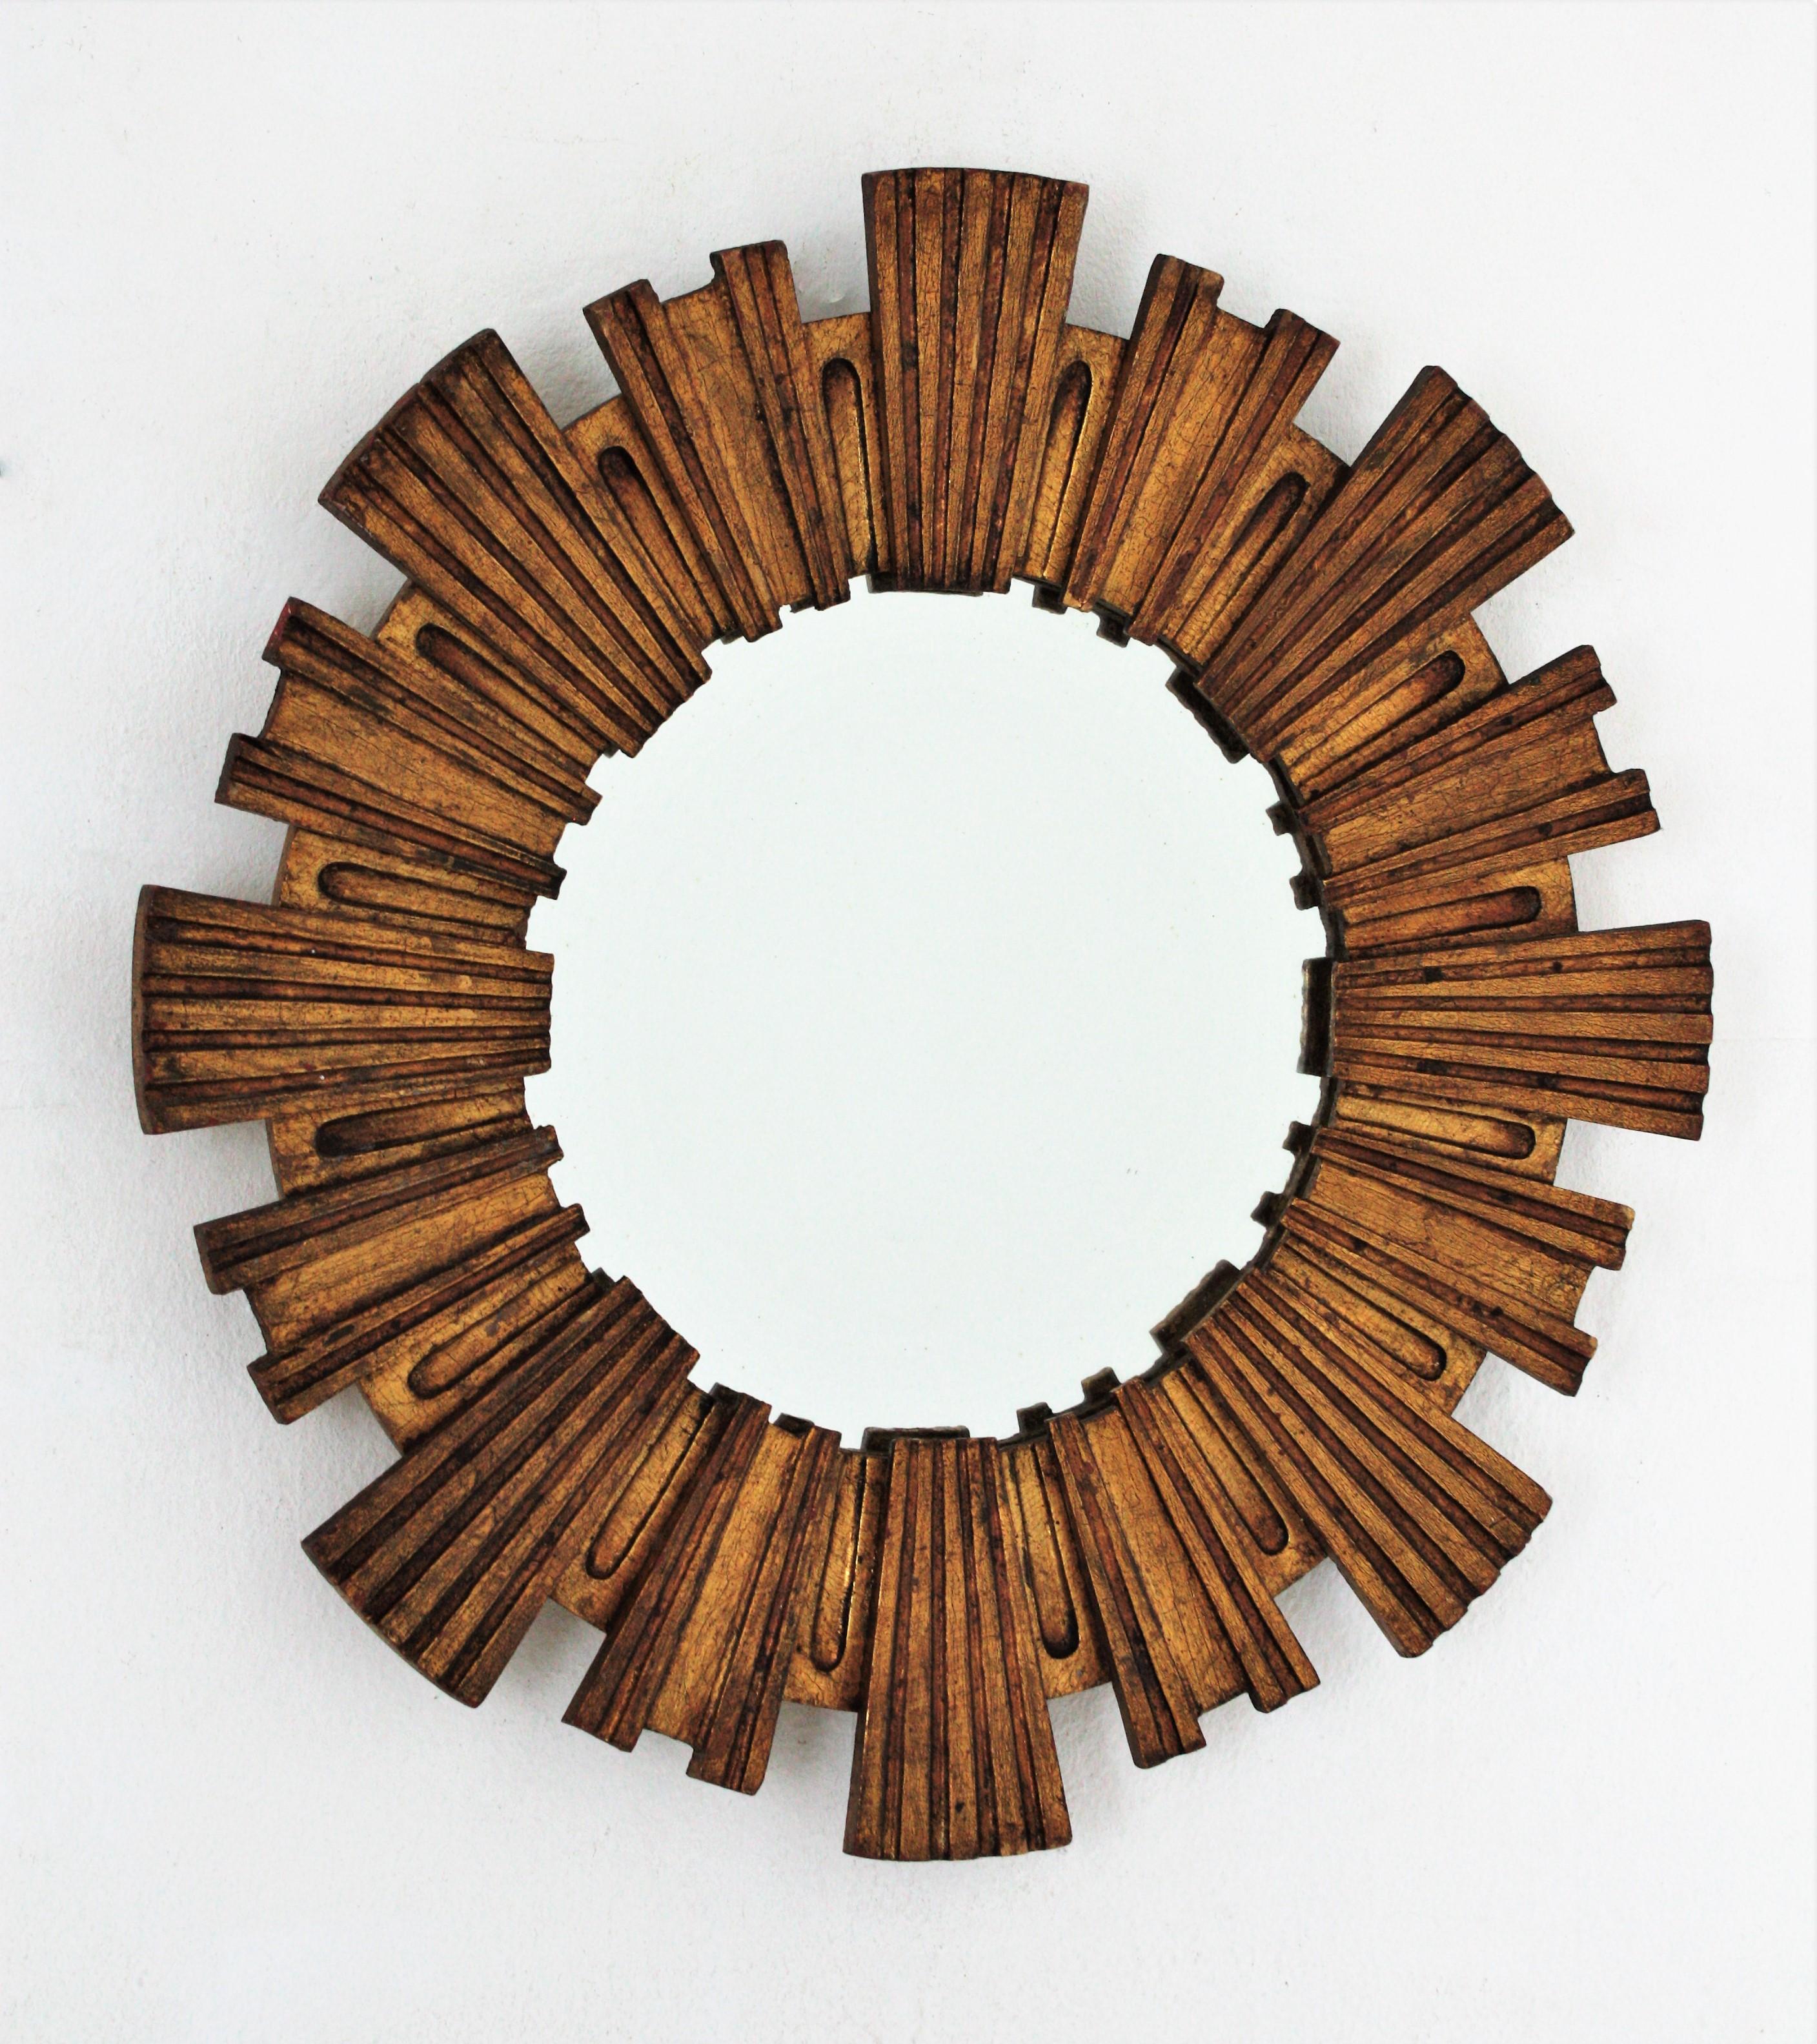 Gorgeous hand carved gold leaf giltwood sunburst mirror by Francisco Hurtado. Spain, 1950s-1960s.
This sunburst mirror manufactured at the Mid-Century Modern period combines accents of Baroque style with midcentury style. It would be a nice